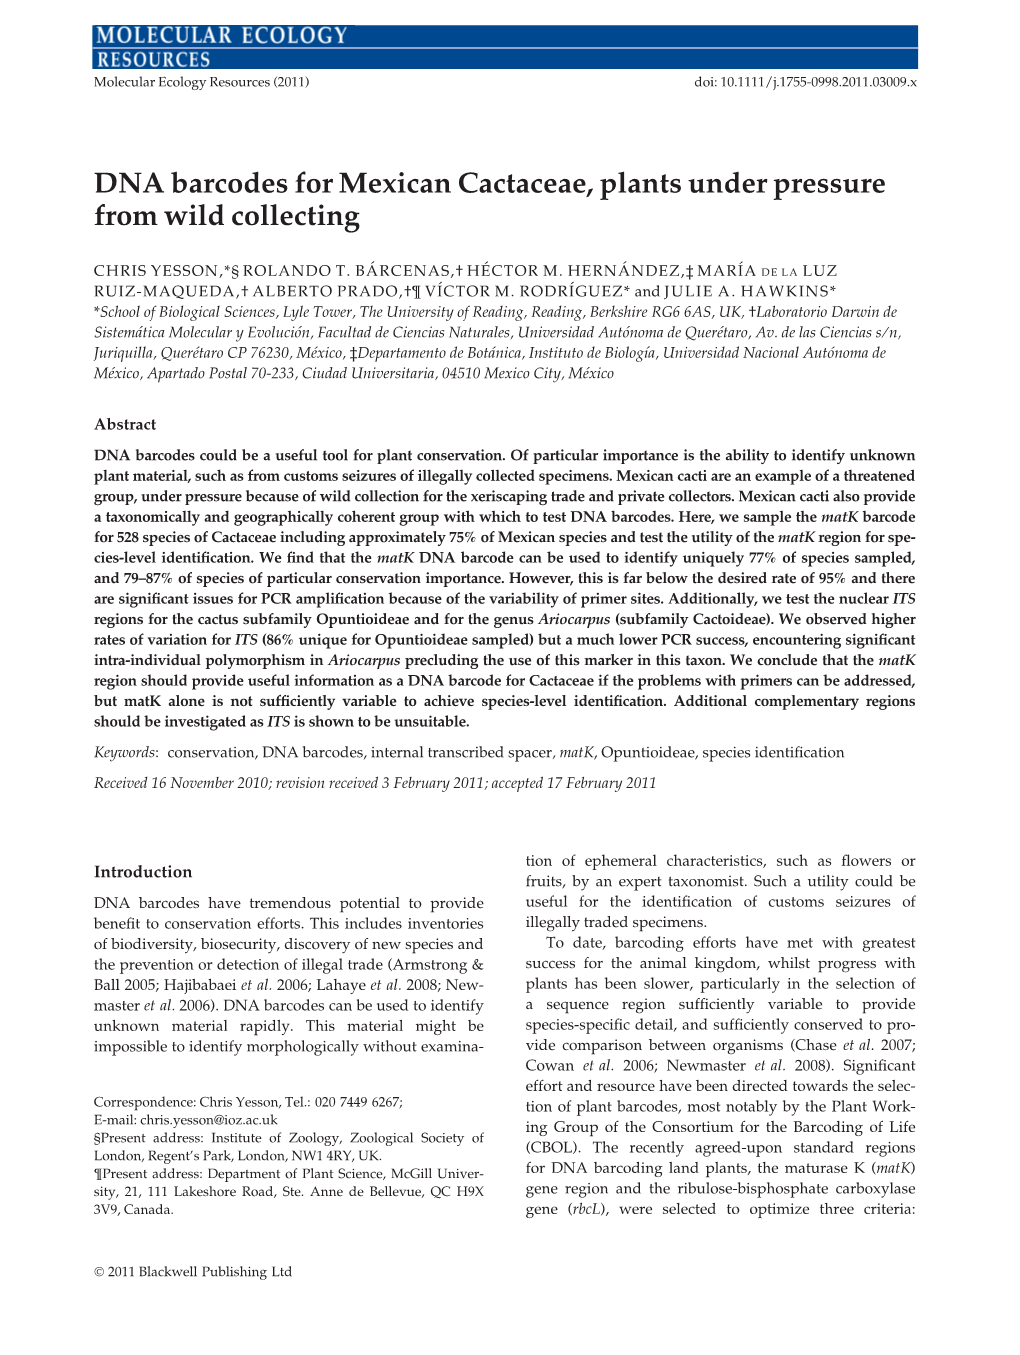 DNA Barcodes for Mexican Cactaceae, Plants Under Pressure from Wild Collecting